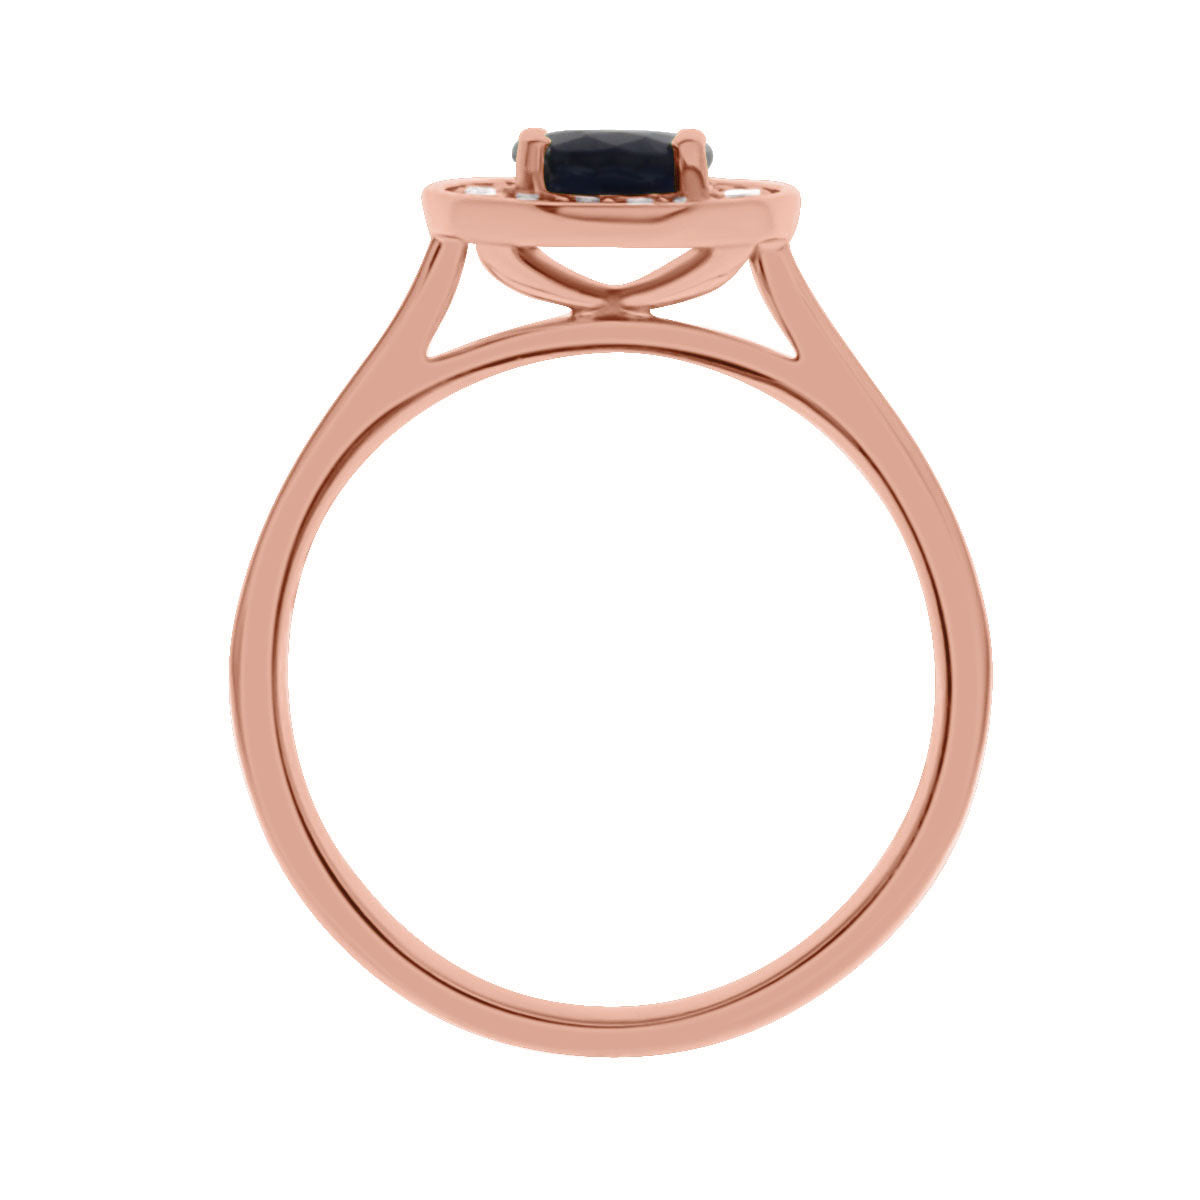 Sapphire Halo Engagement Ring in rose gold standing vertical